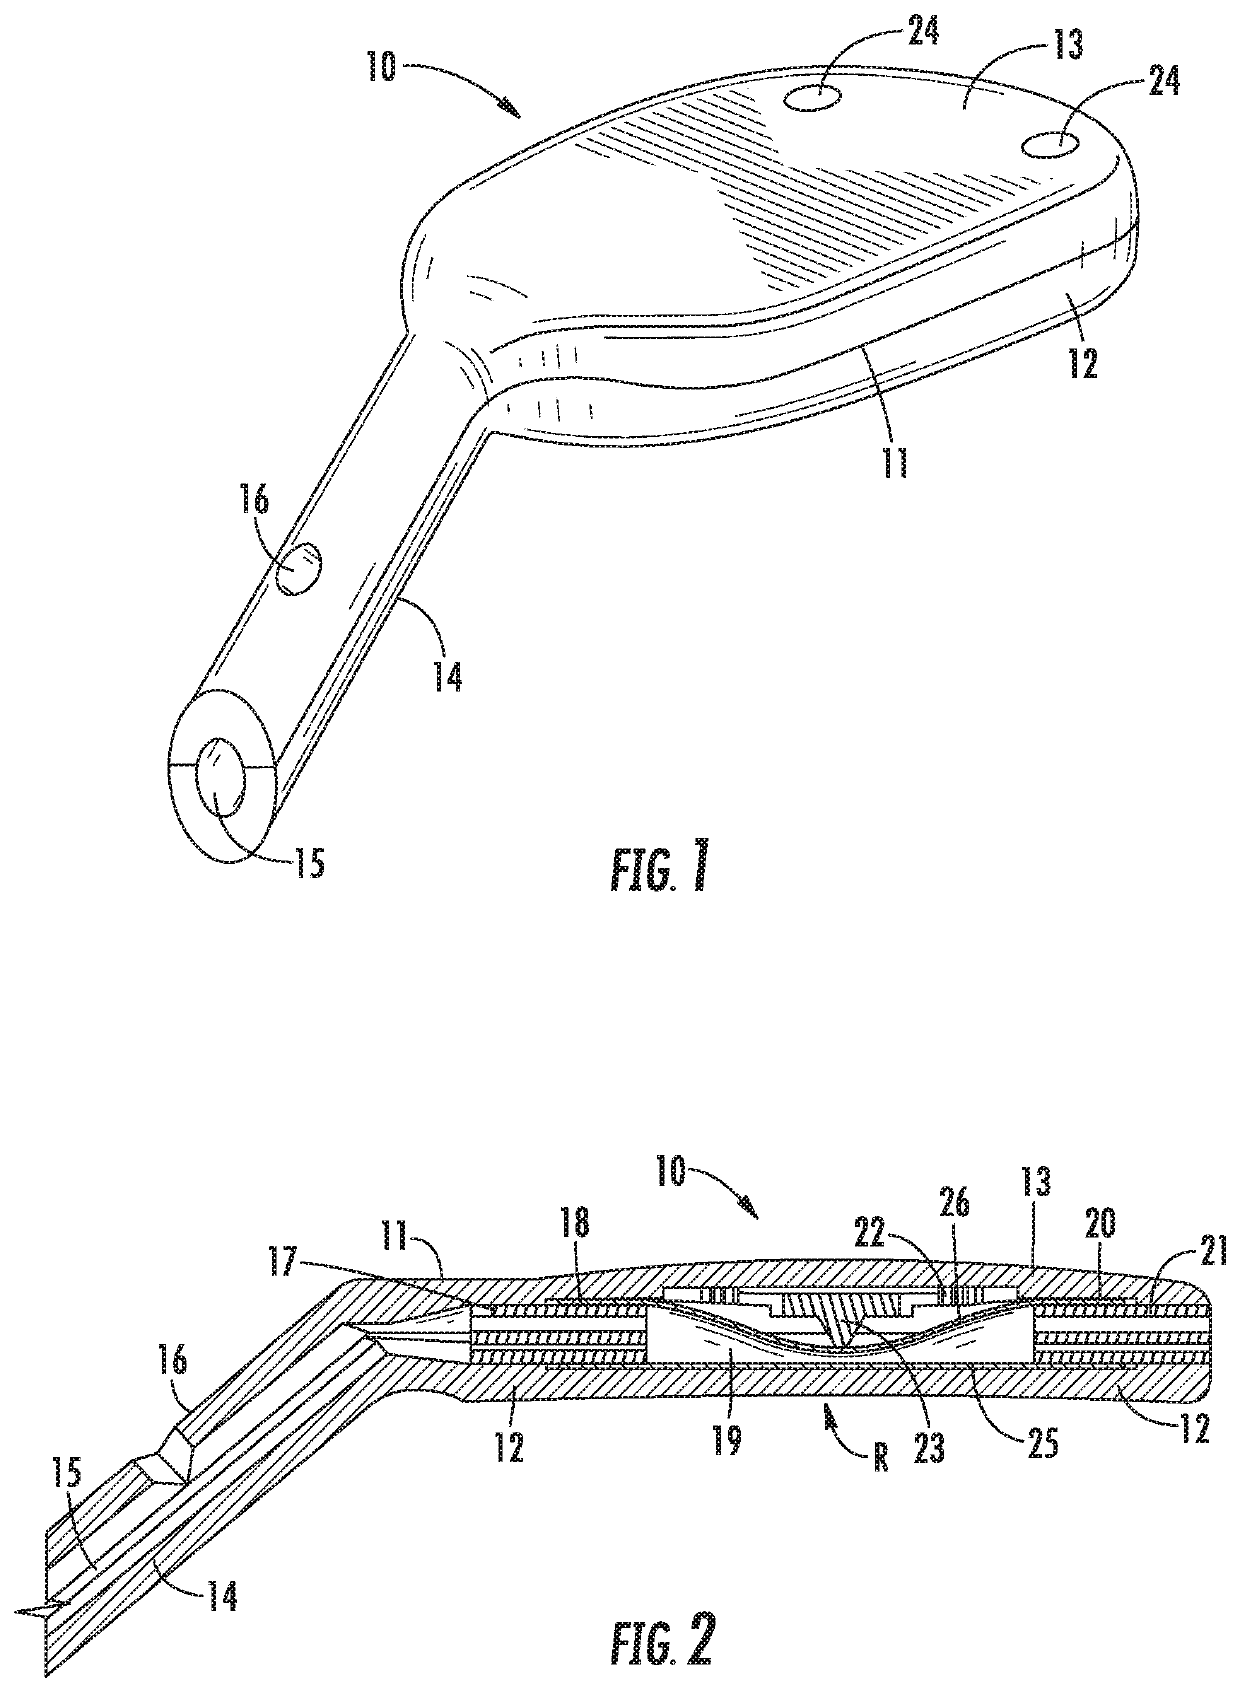 Apparatus for treating excess intraocular fluid